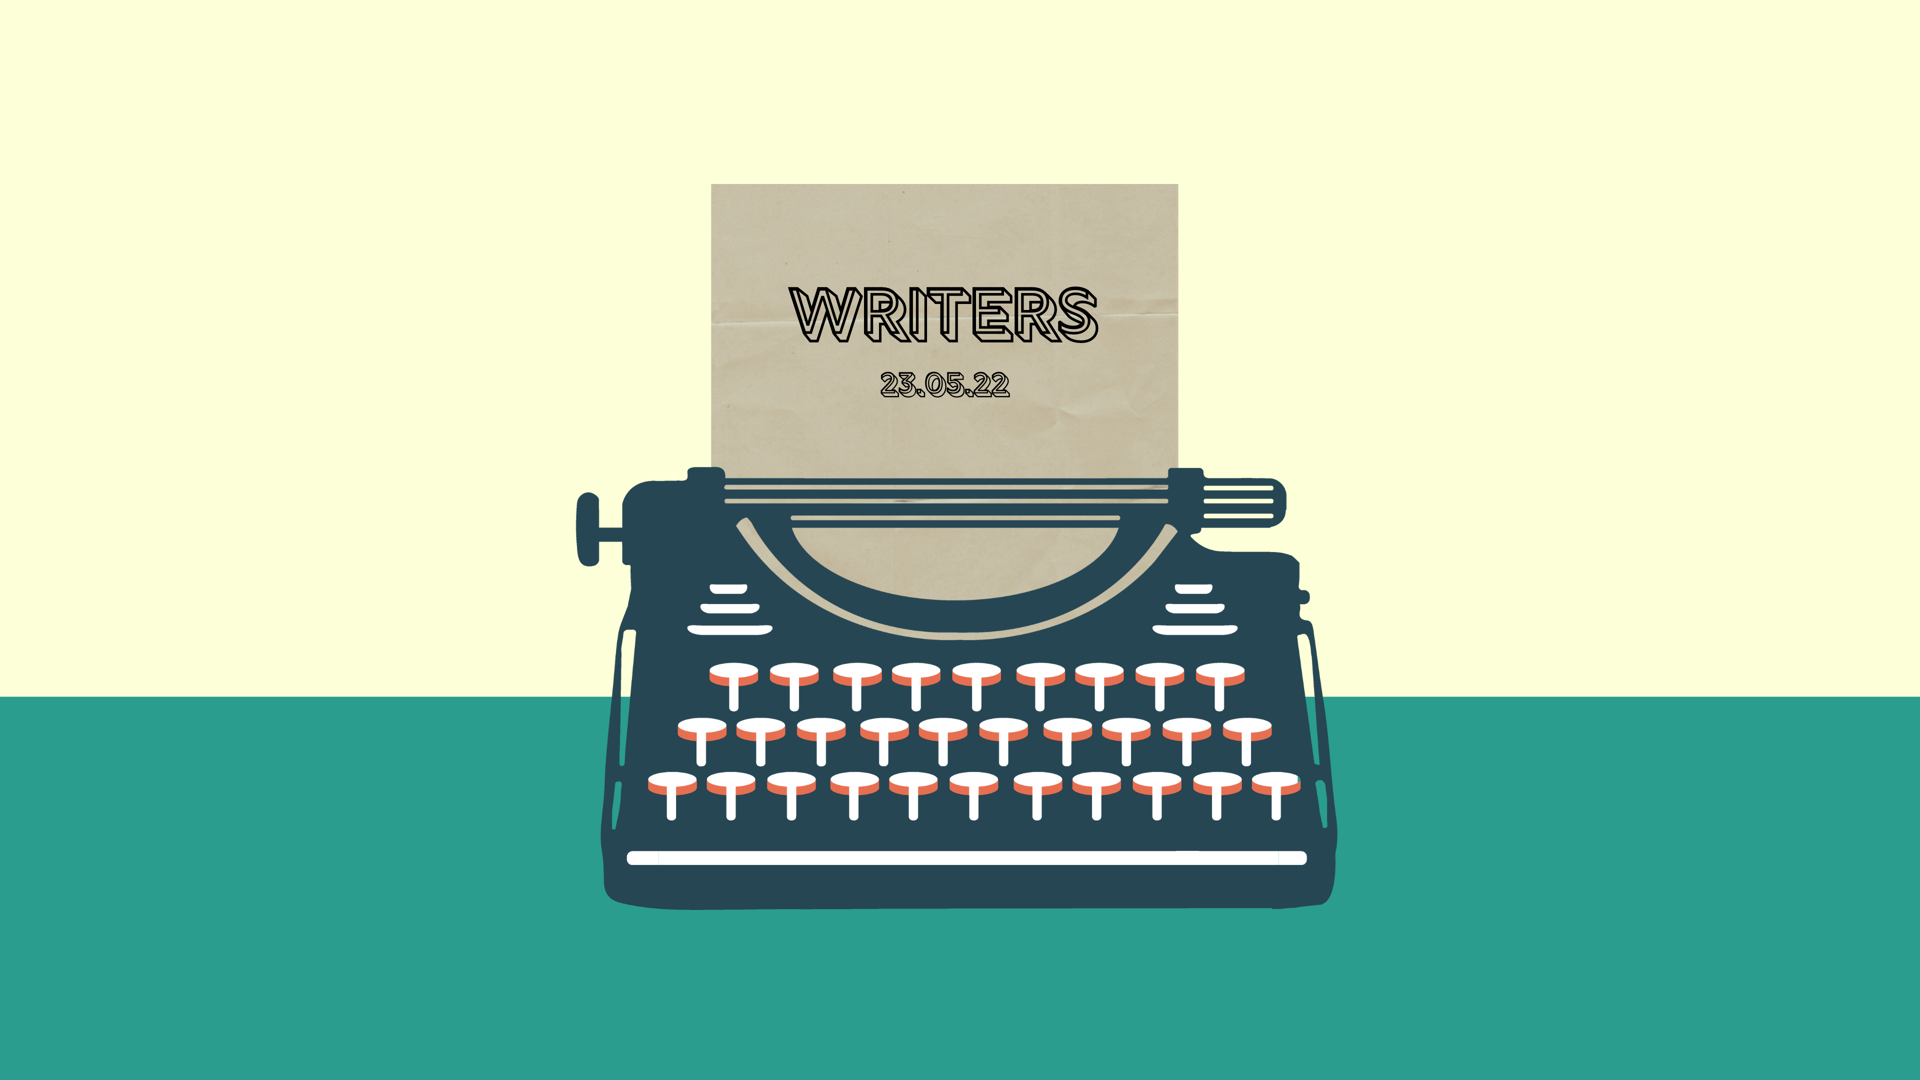 Writers event banner